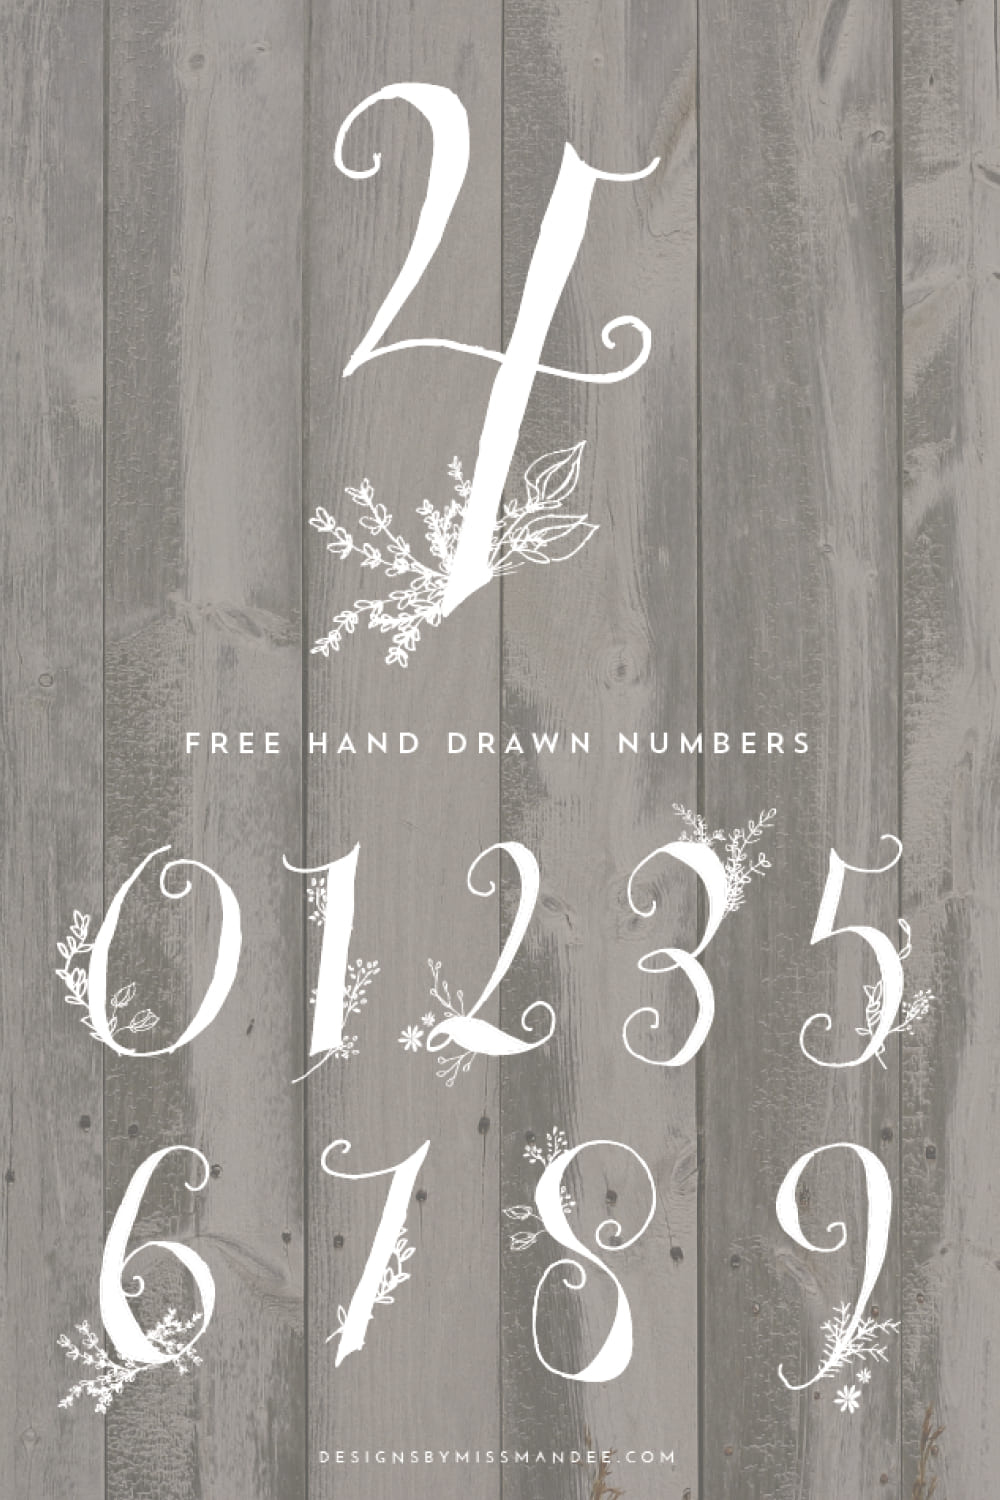 An example of a STUNNING HAND DRAWN NUMBERSBY MANDEE font in white with flowers.